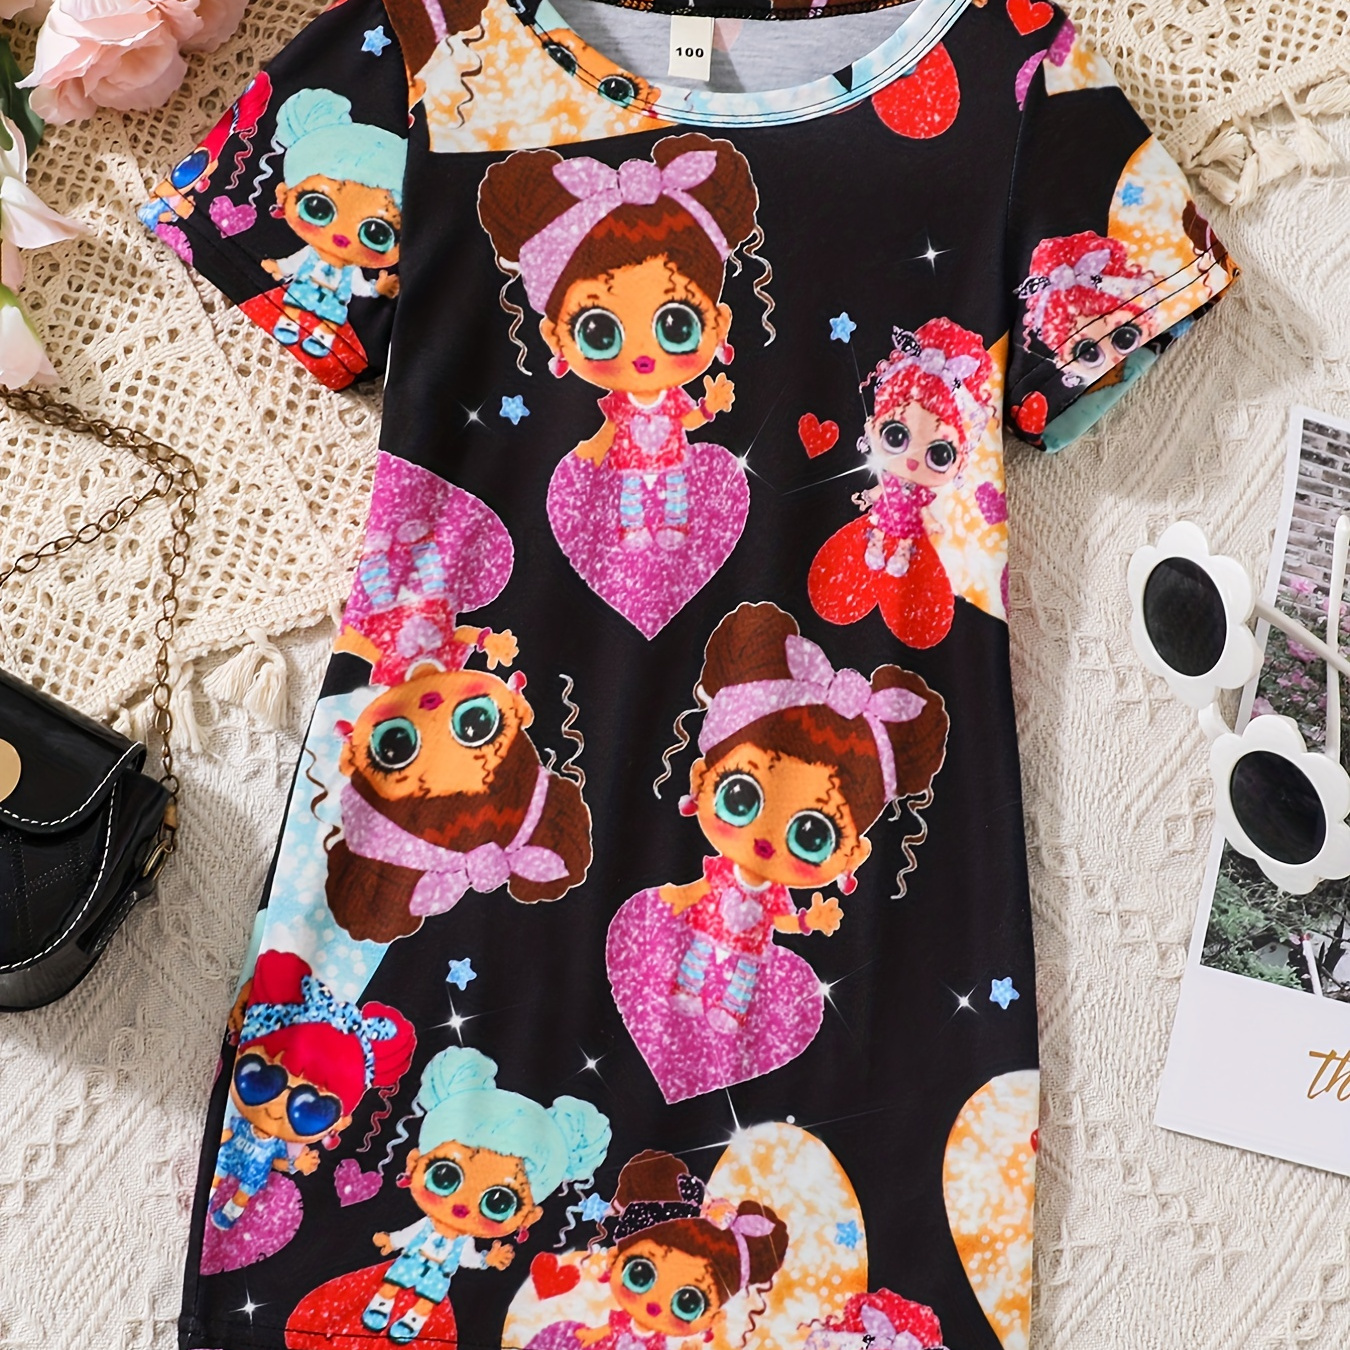 Toddler Girls Cute Cartoon 'shiny Girl' Graphic Crew Neck Casual T-shirt Dress For Party Kids Summer Clothes